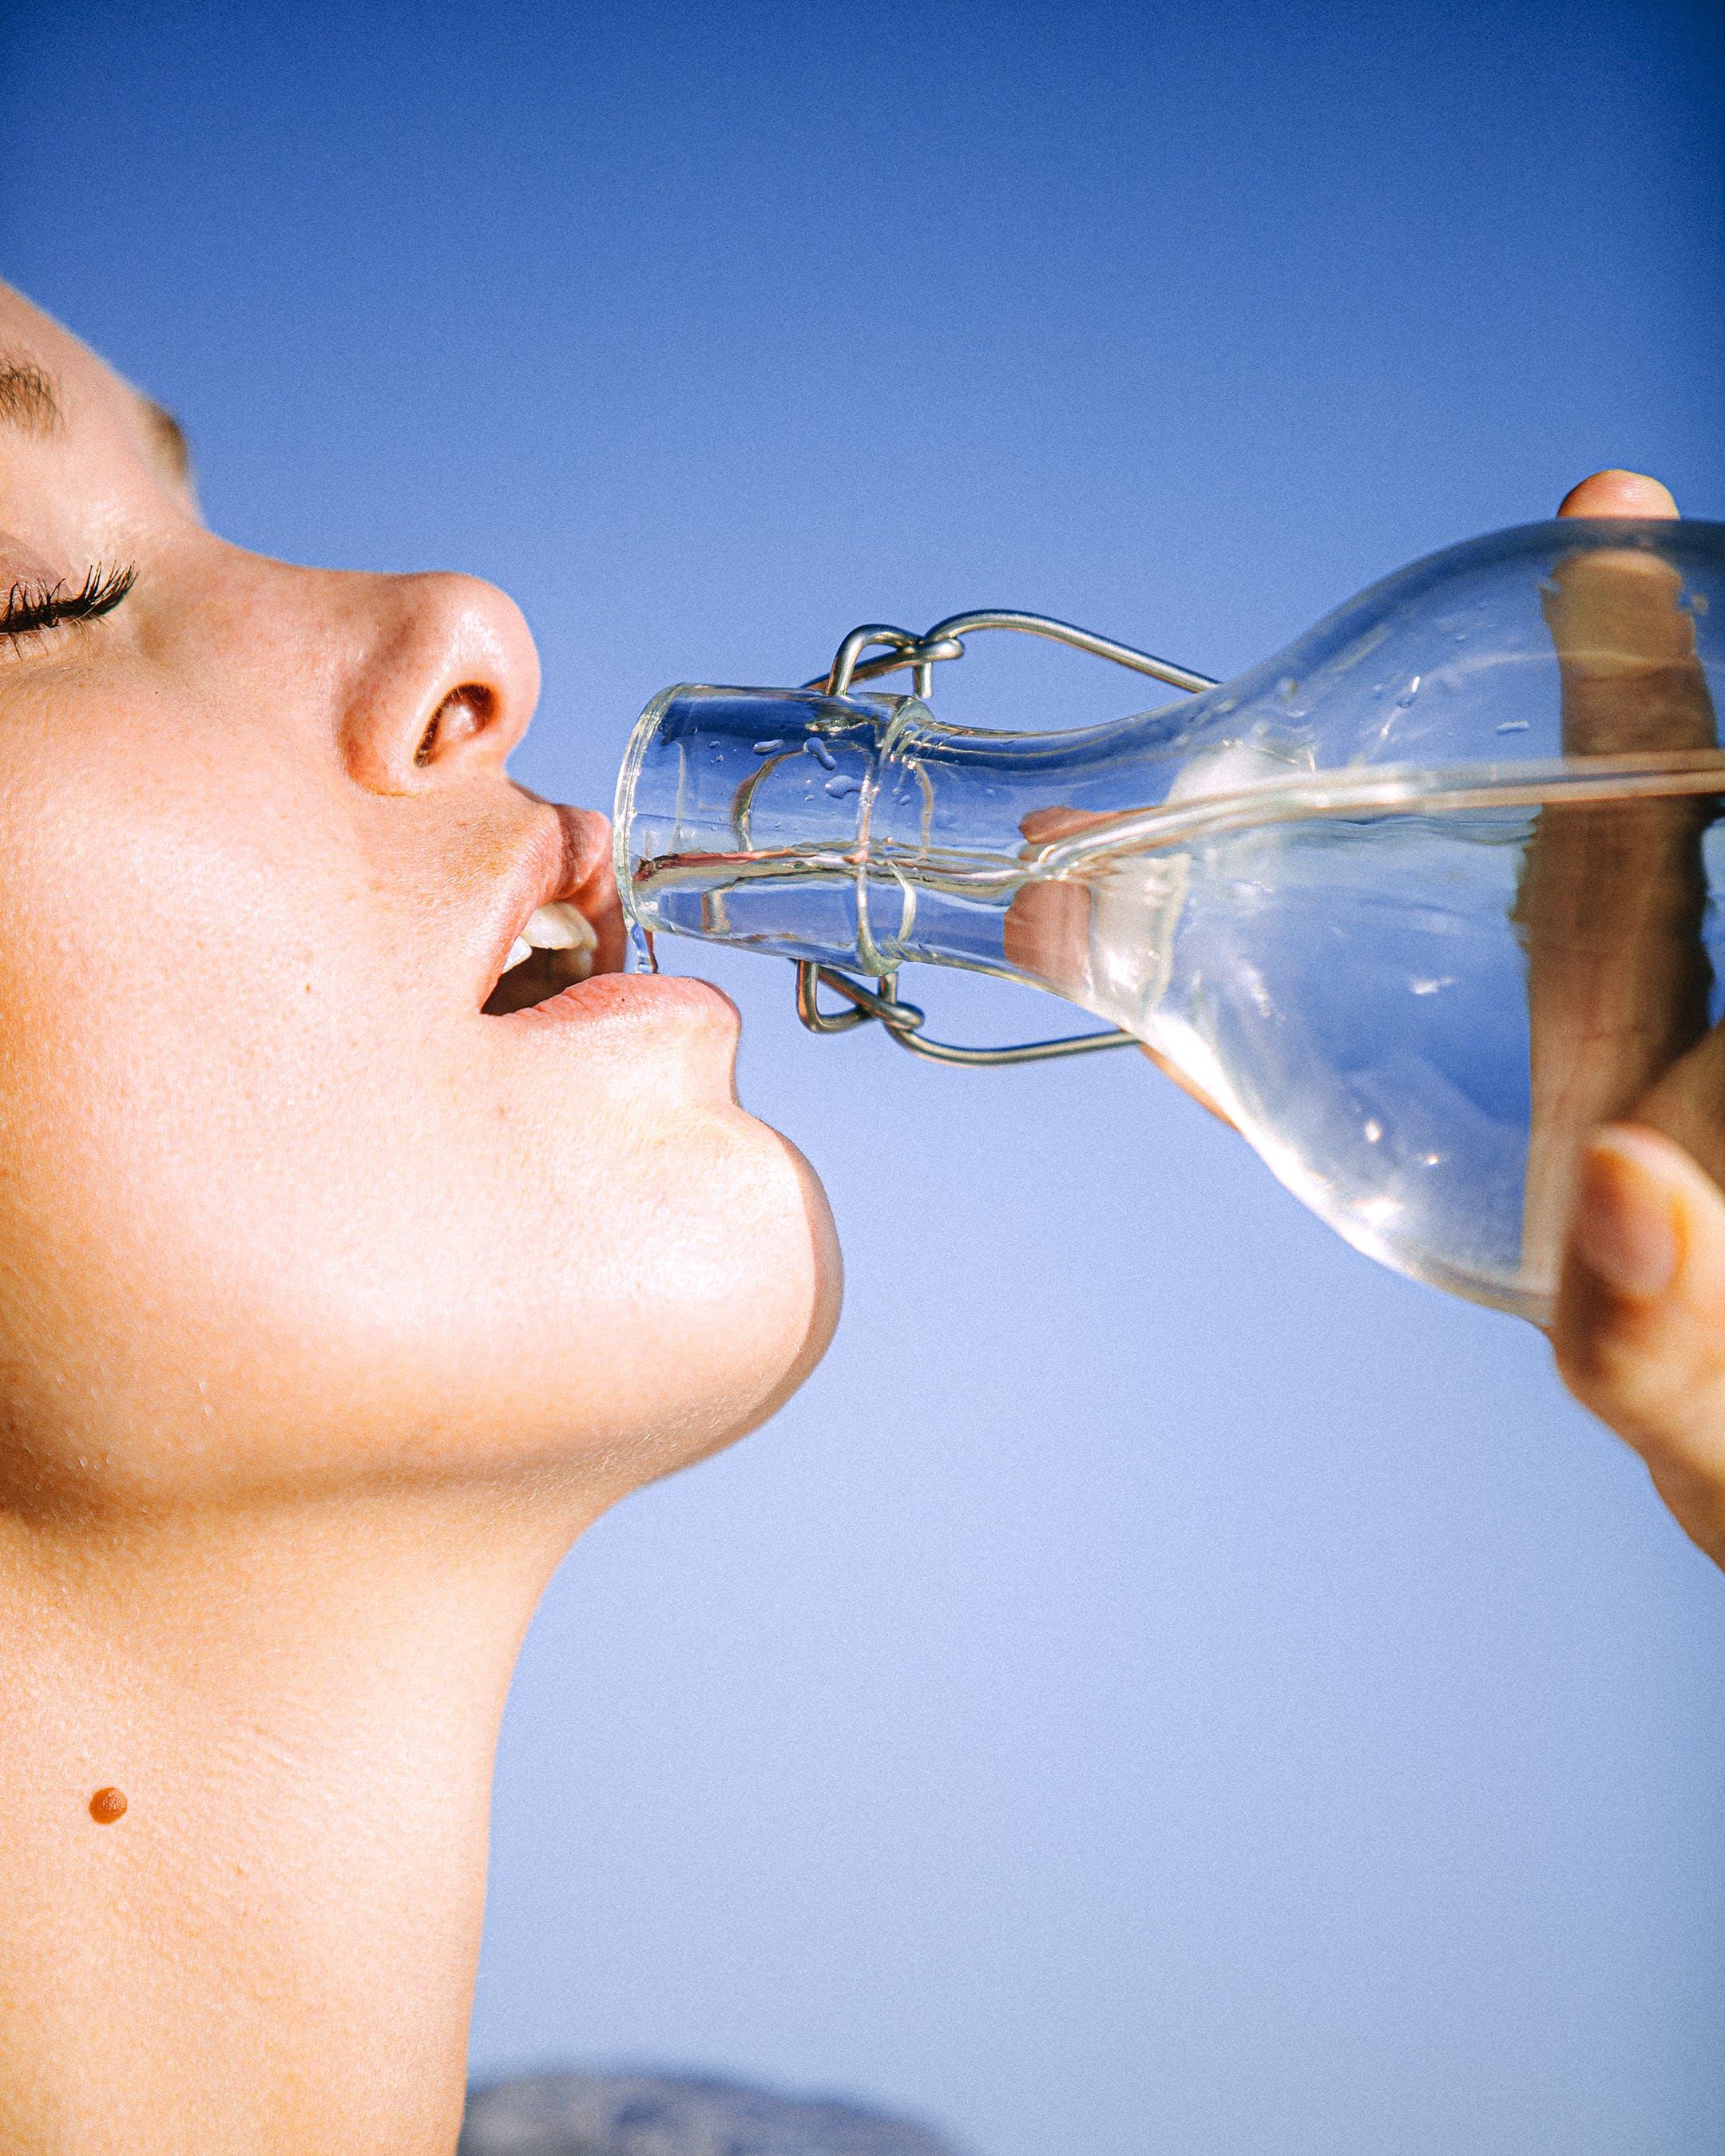 What happens when you drink sterile water? 